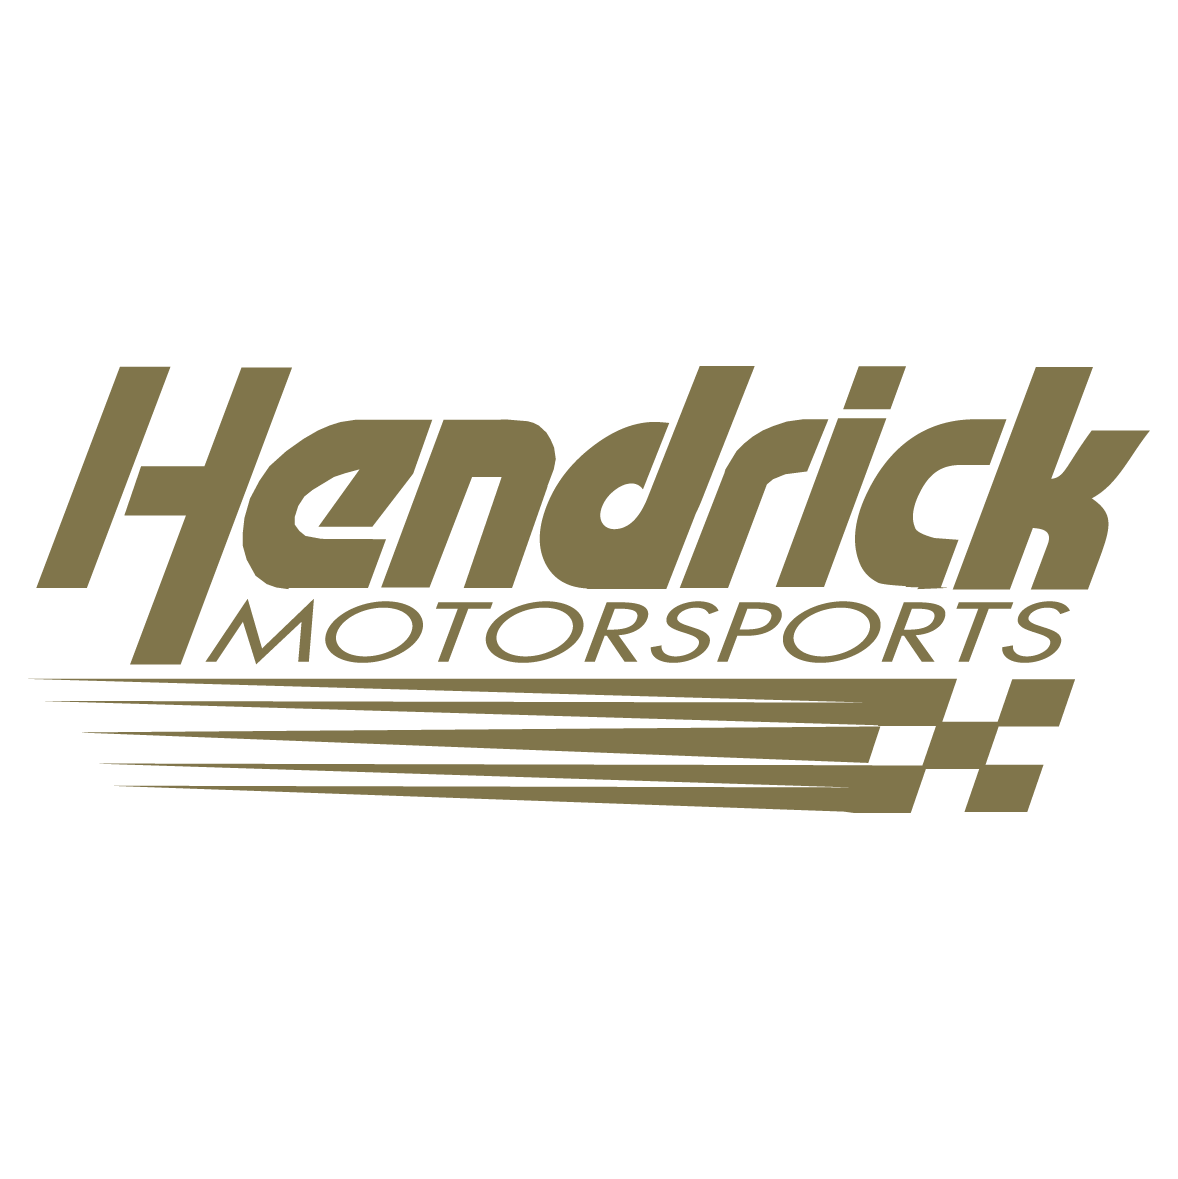 The Wandering Social Trusted by Hendrick Motorsports